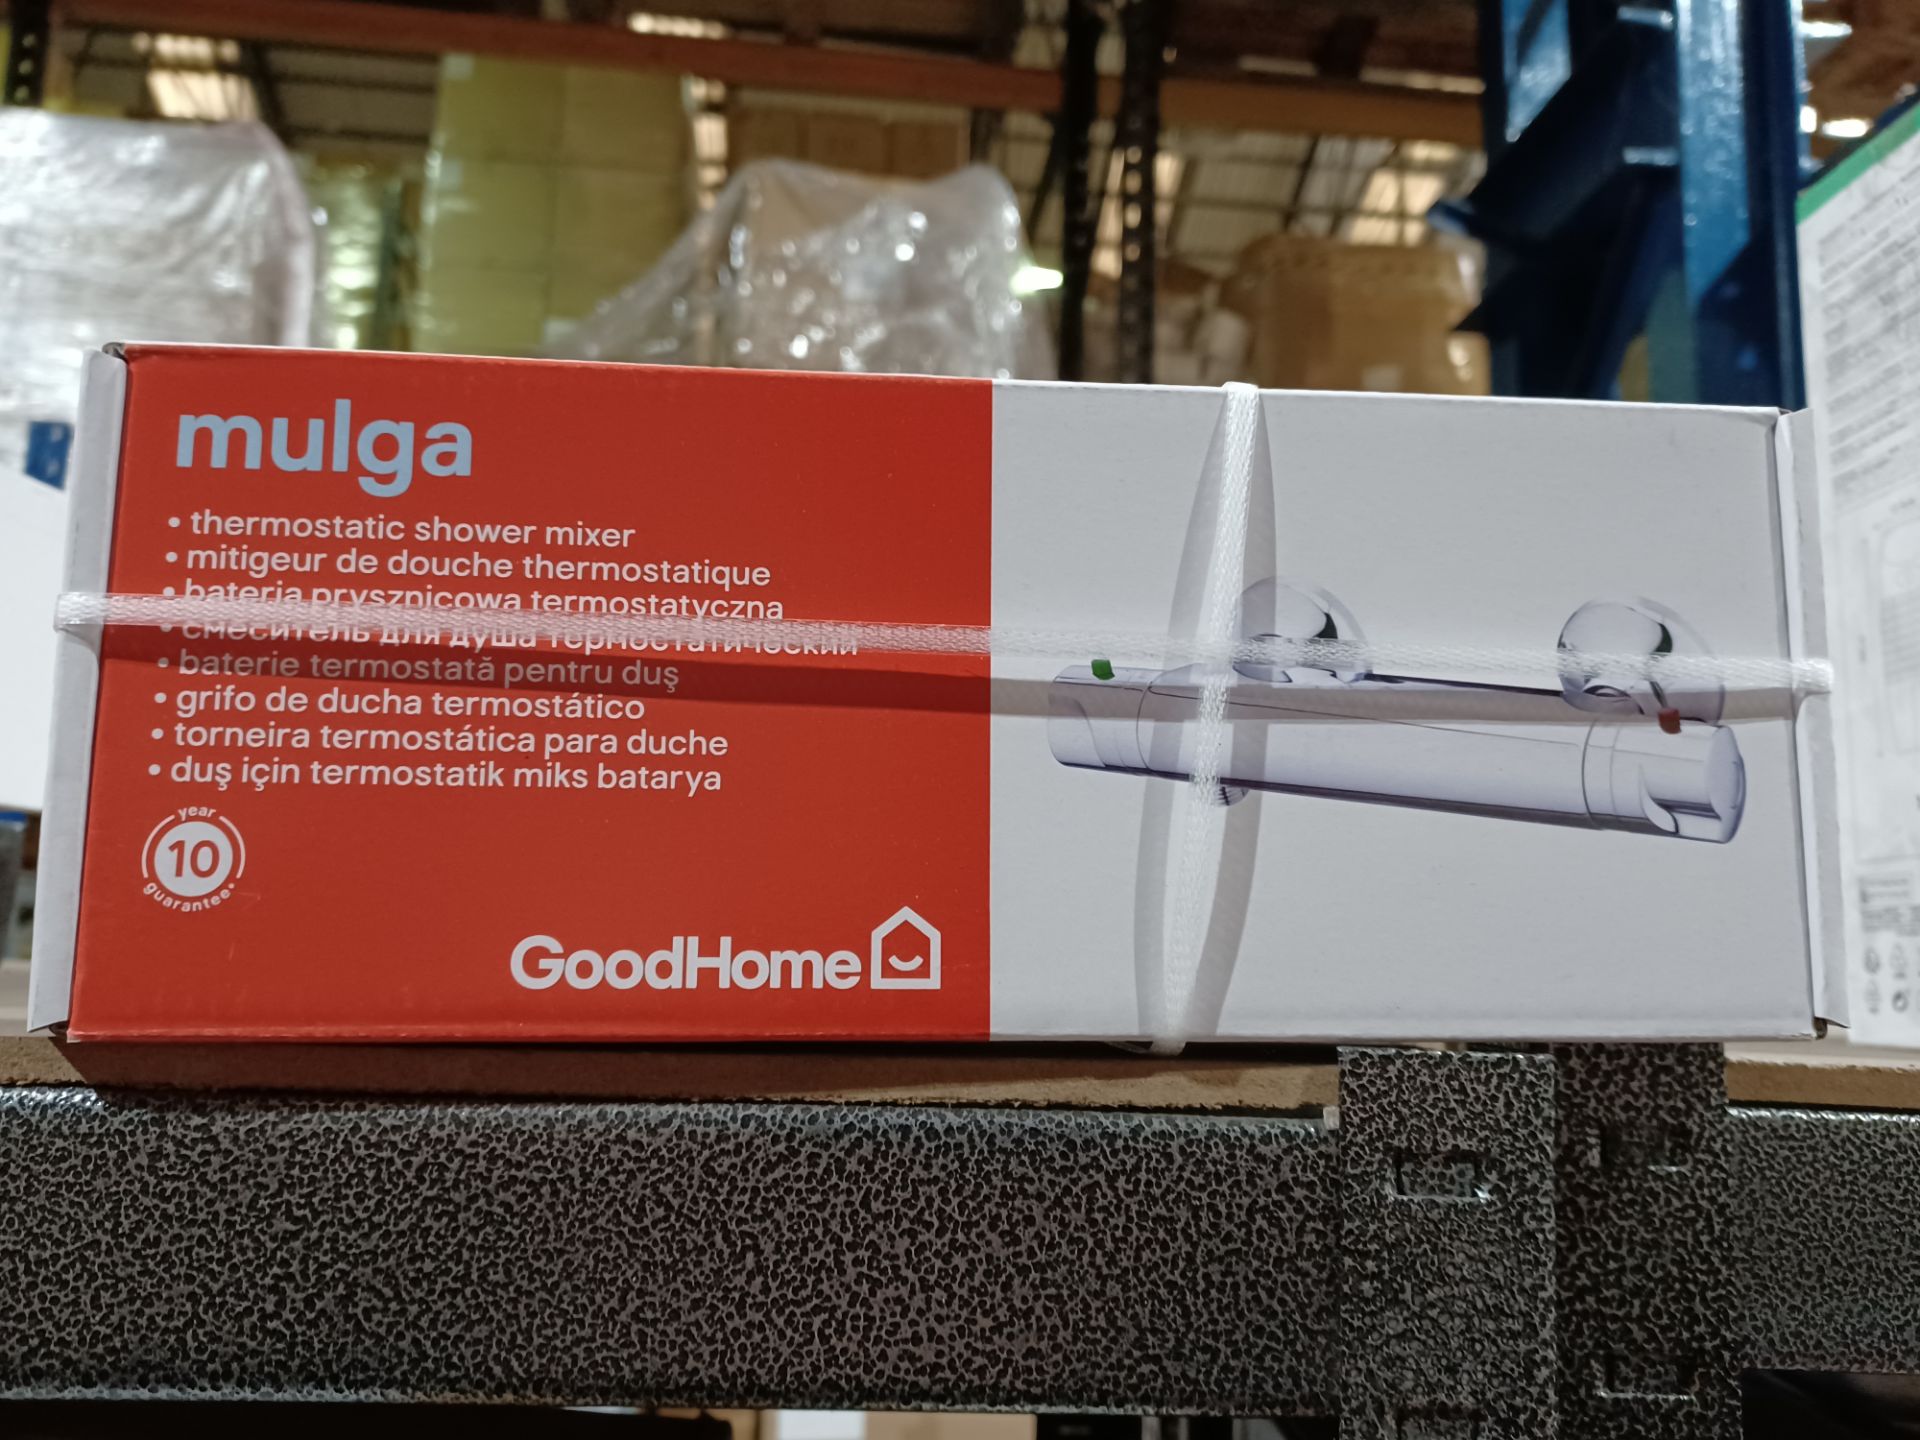 5 X GOODHOME MULGA EXPOSED THERMOSTATIC MIXER SHOWER VALVE FIXED CHROME RRP £50.00 EACH - PCK